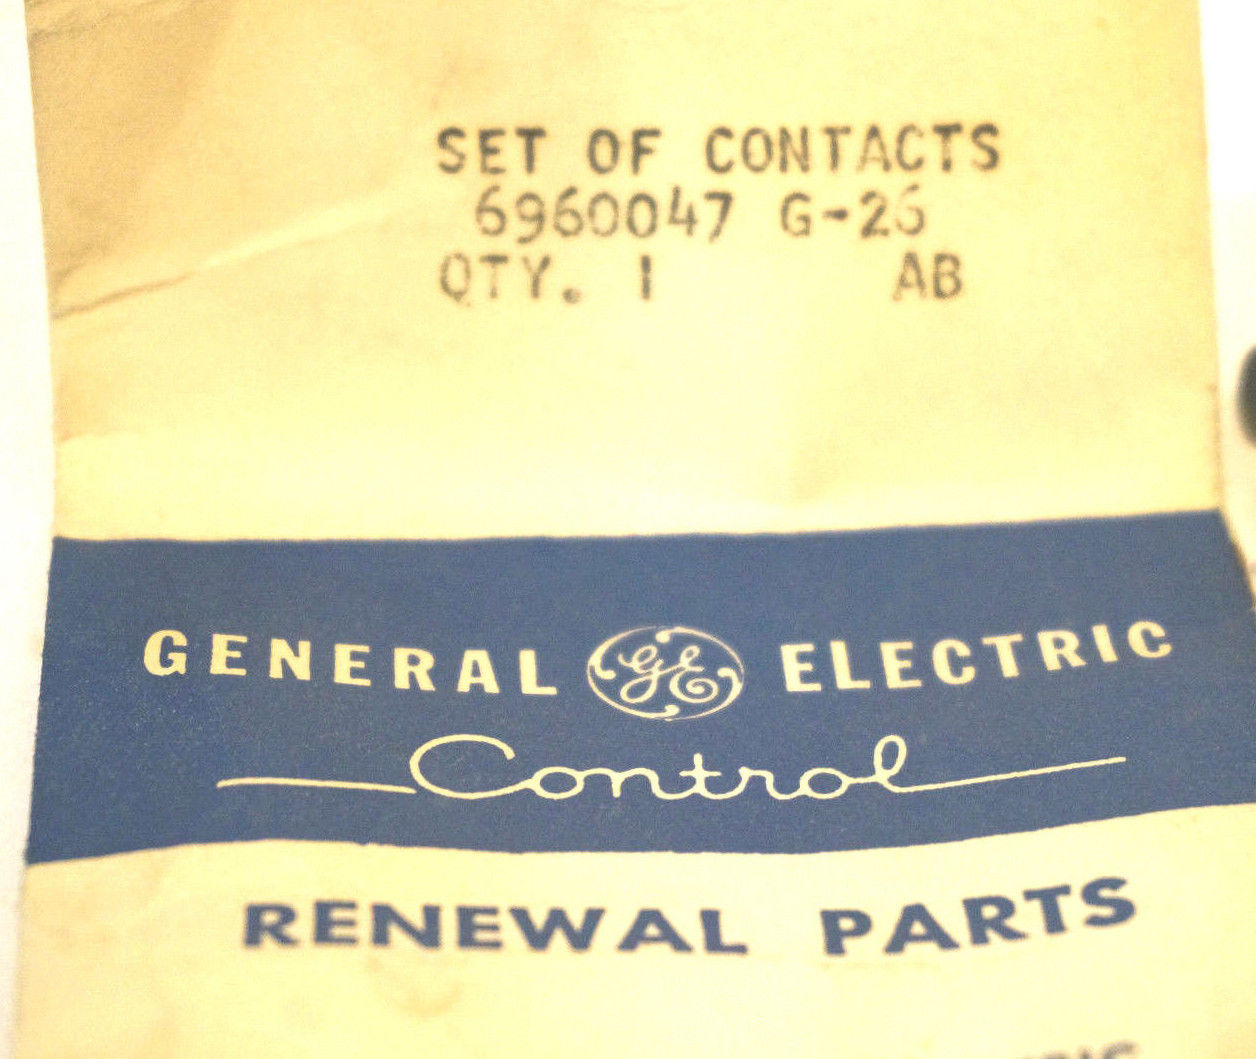 3 NEW GE GENERAL ELECTRIC REPLACEMENT CONTACT KIT 6960047G26 